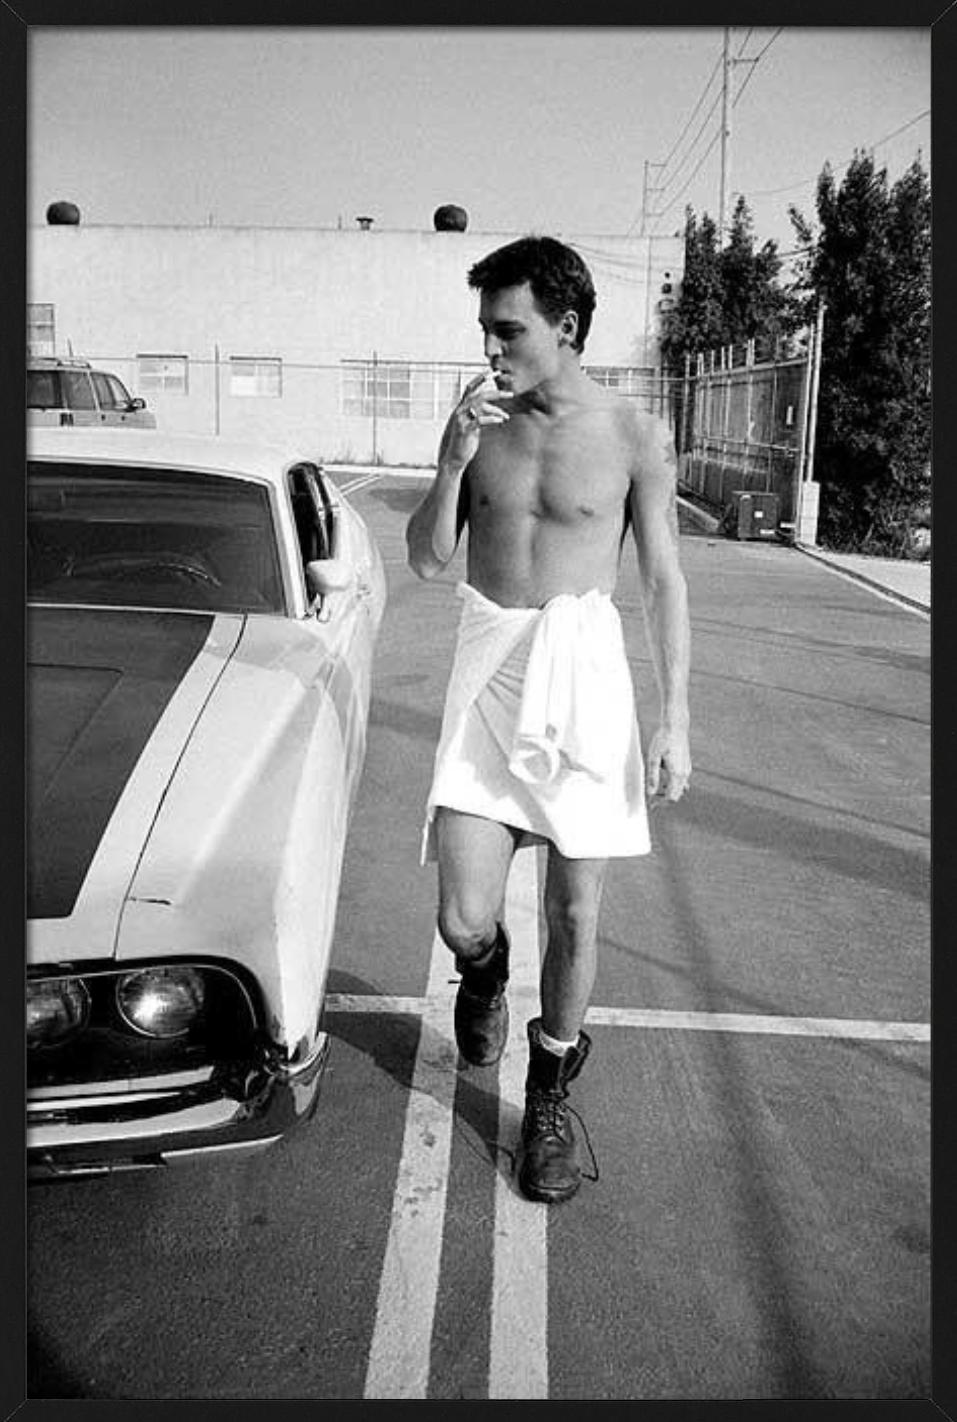 Johnny Depp, Hollywood, CA - the actor in a towel and cigarette beside a car - Contemporary Photograph by Sante D´ Orazio